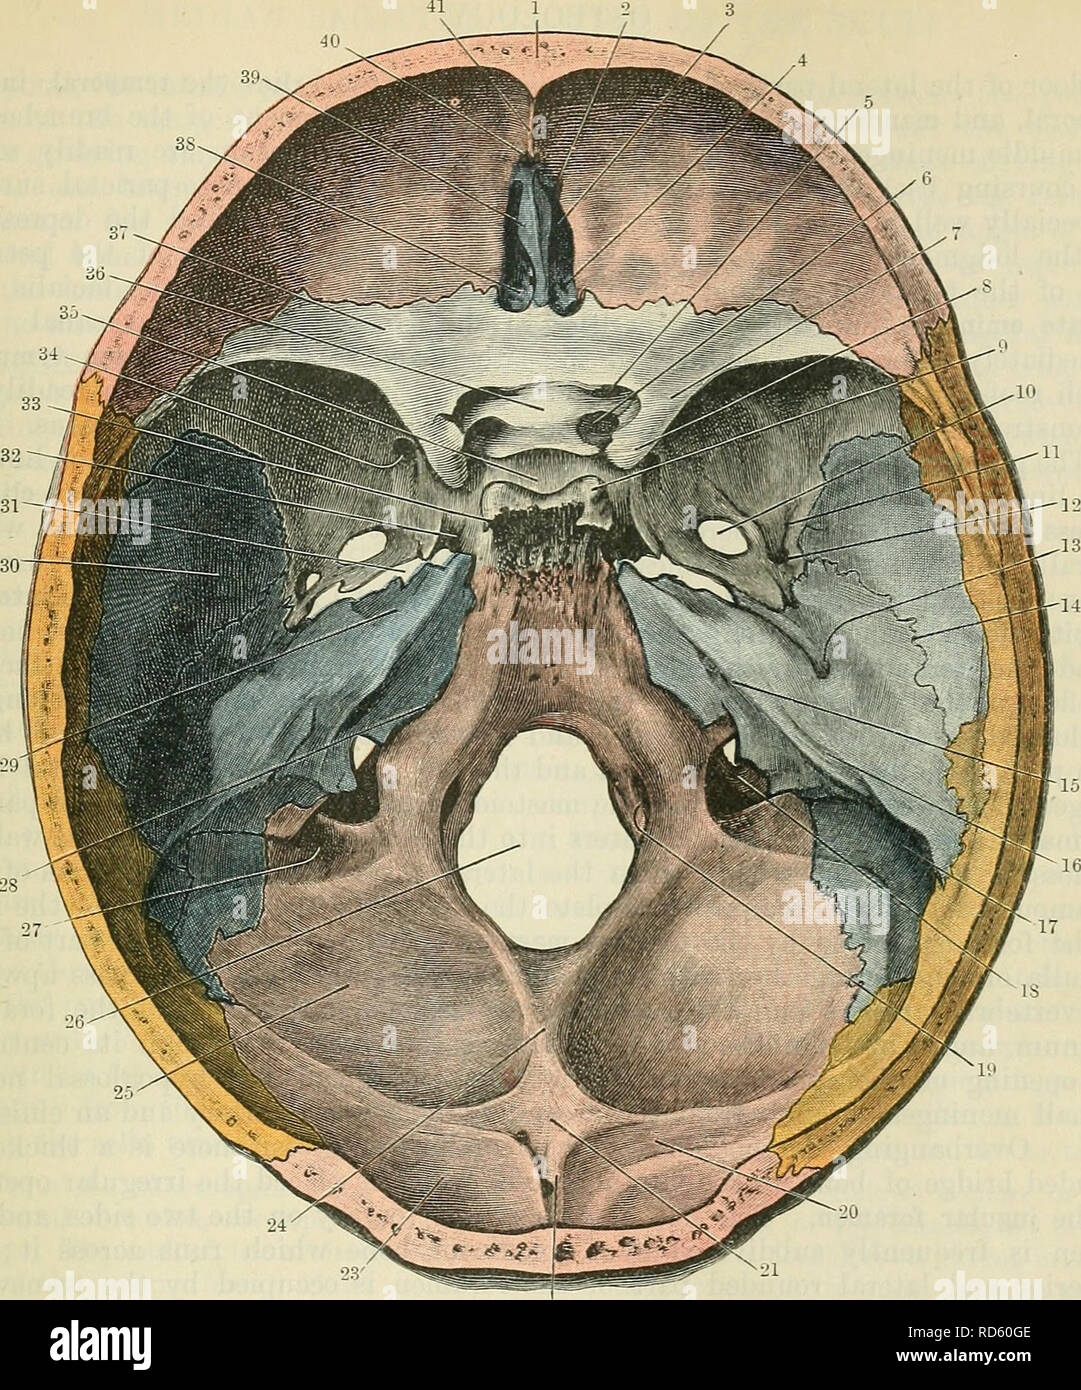 . Cunningham's Text-book of anatomy. Anatomy. Fig. 172.—Base of the Skull seen from above. The frontal and occipital bones are coloured red ; the ethmoid and temporal bones, blue ; the parietal, orange ; and the sphenoid is left uncoloured. 9. 10. 11. 12. 13. 14. 15. 16. 17. 18. 19. 20. 21. 22. 23. Frontal bone. Slit for anterior ethmoidal nerve. Anterior ethmoidal foramen. Posterior ethmoidal foramen. Optic forameu. Foramen for internal carotid artery formed by anterior and middle clinoid process. Small wing of sphenoid. Anterior clinoid process, in this case united on its medial side to the  Stock Photo